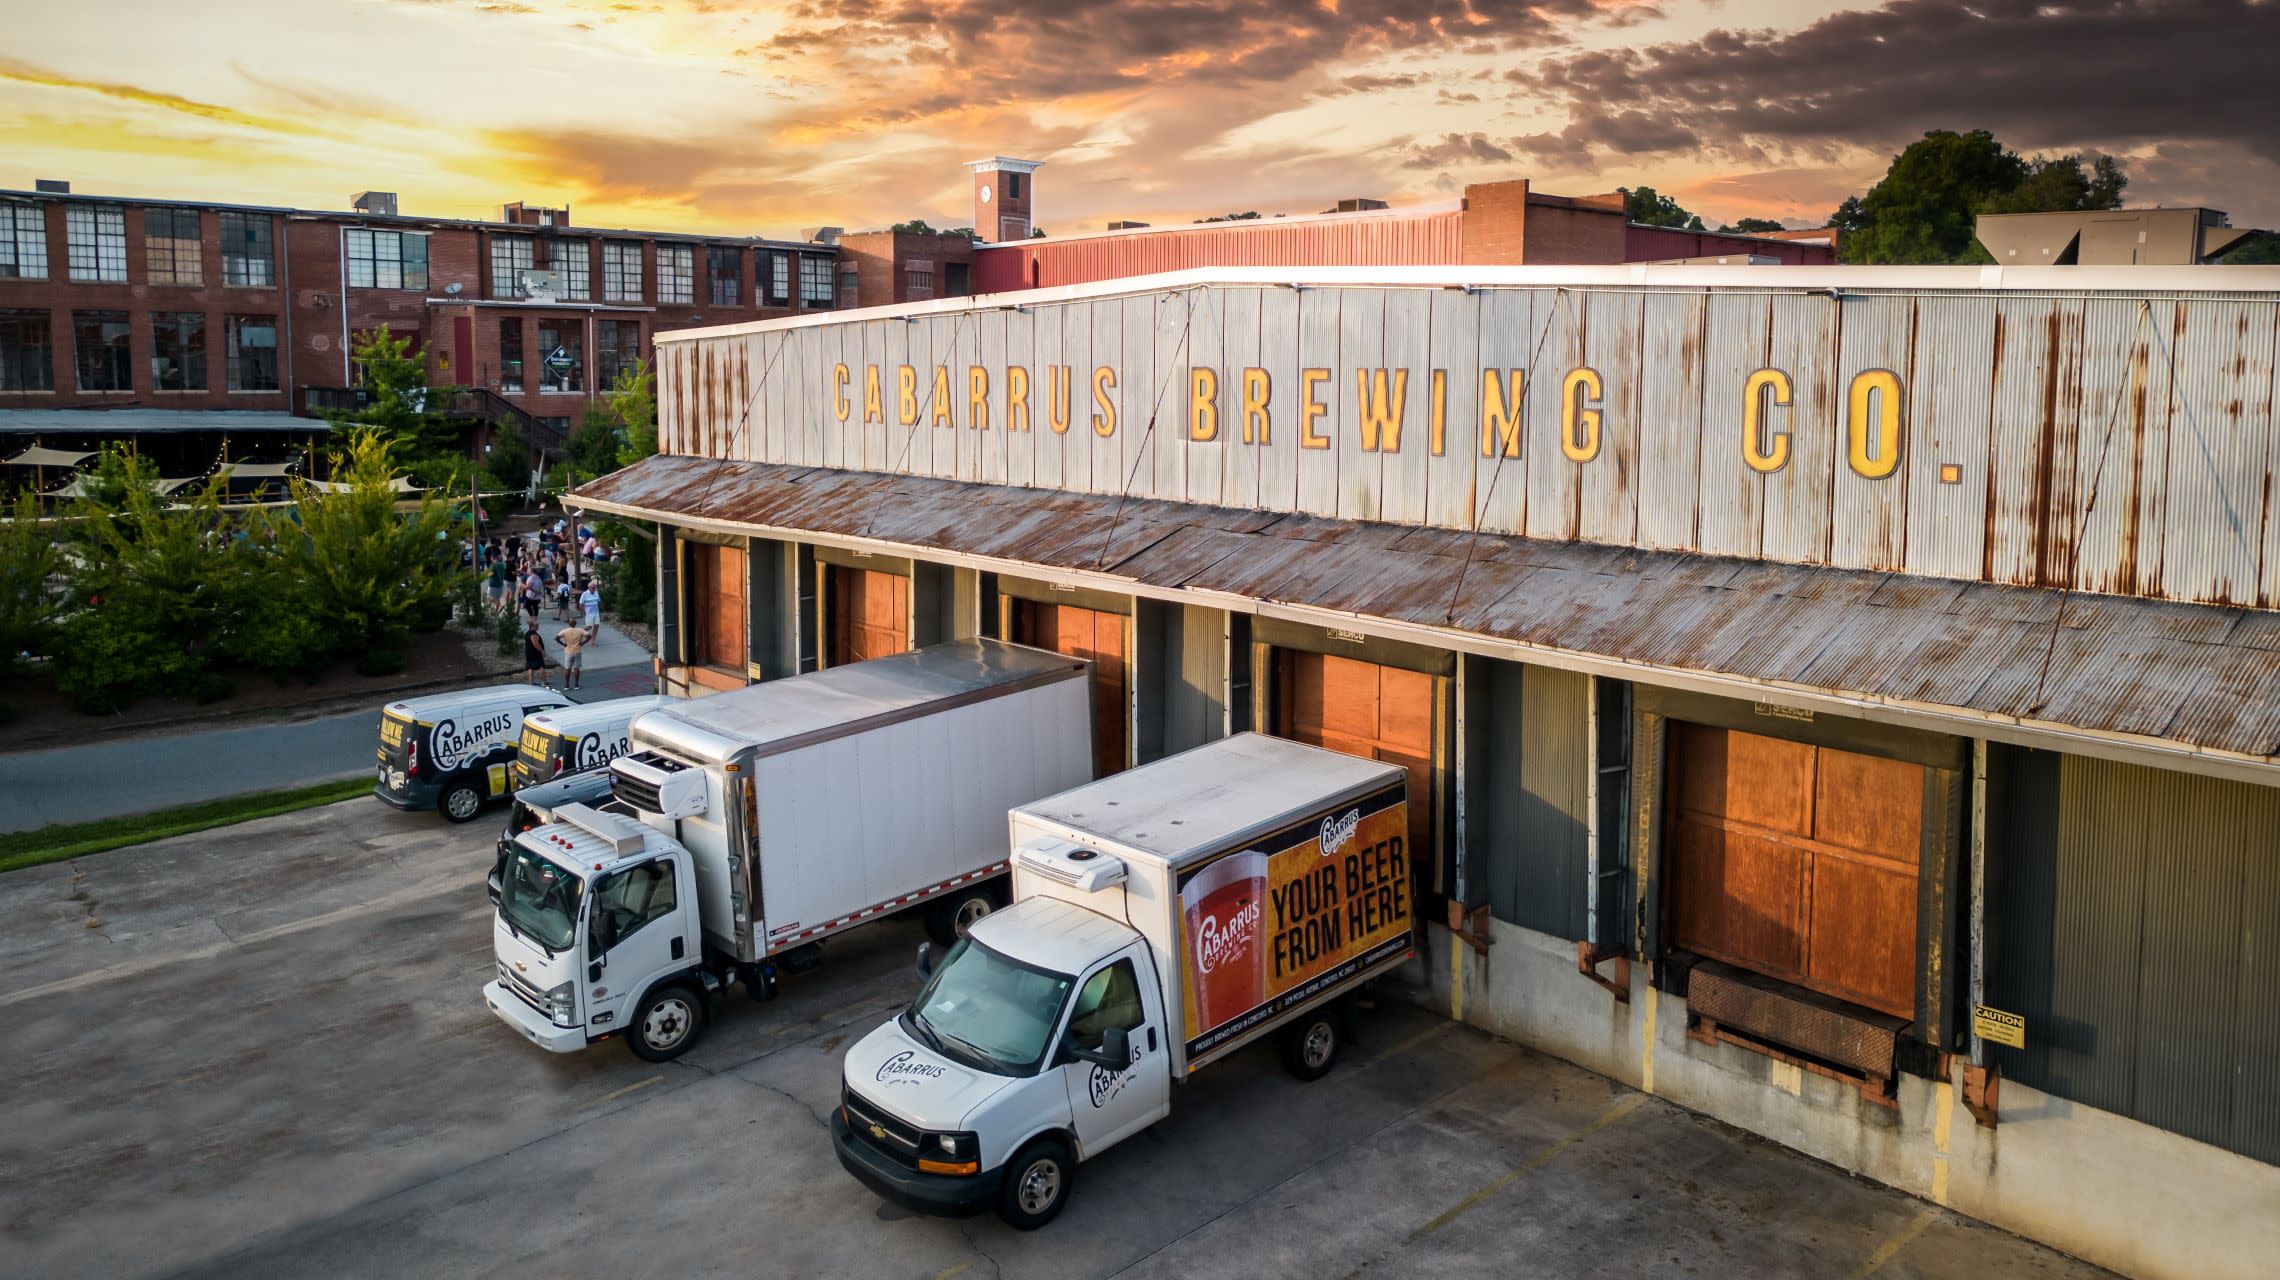 exterior of brewery at sunset